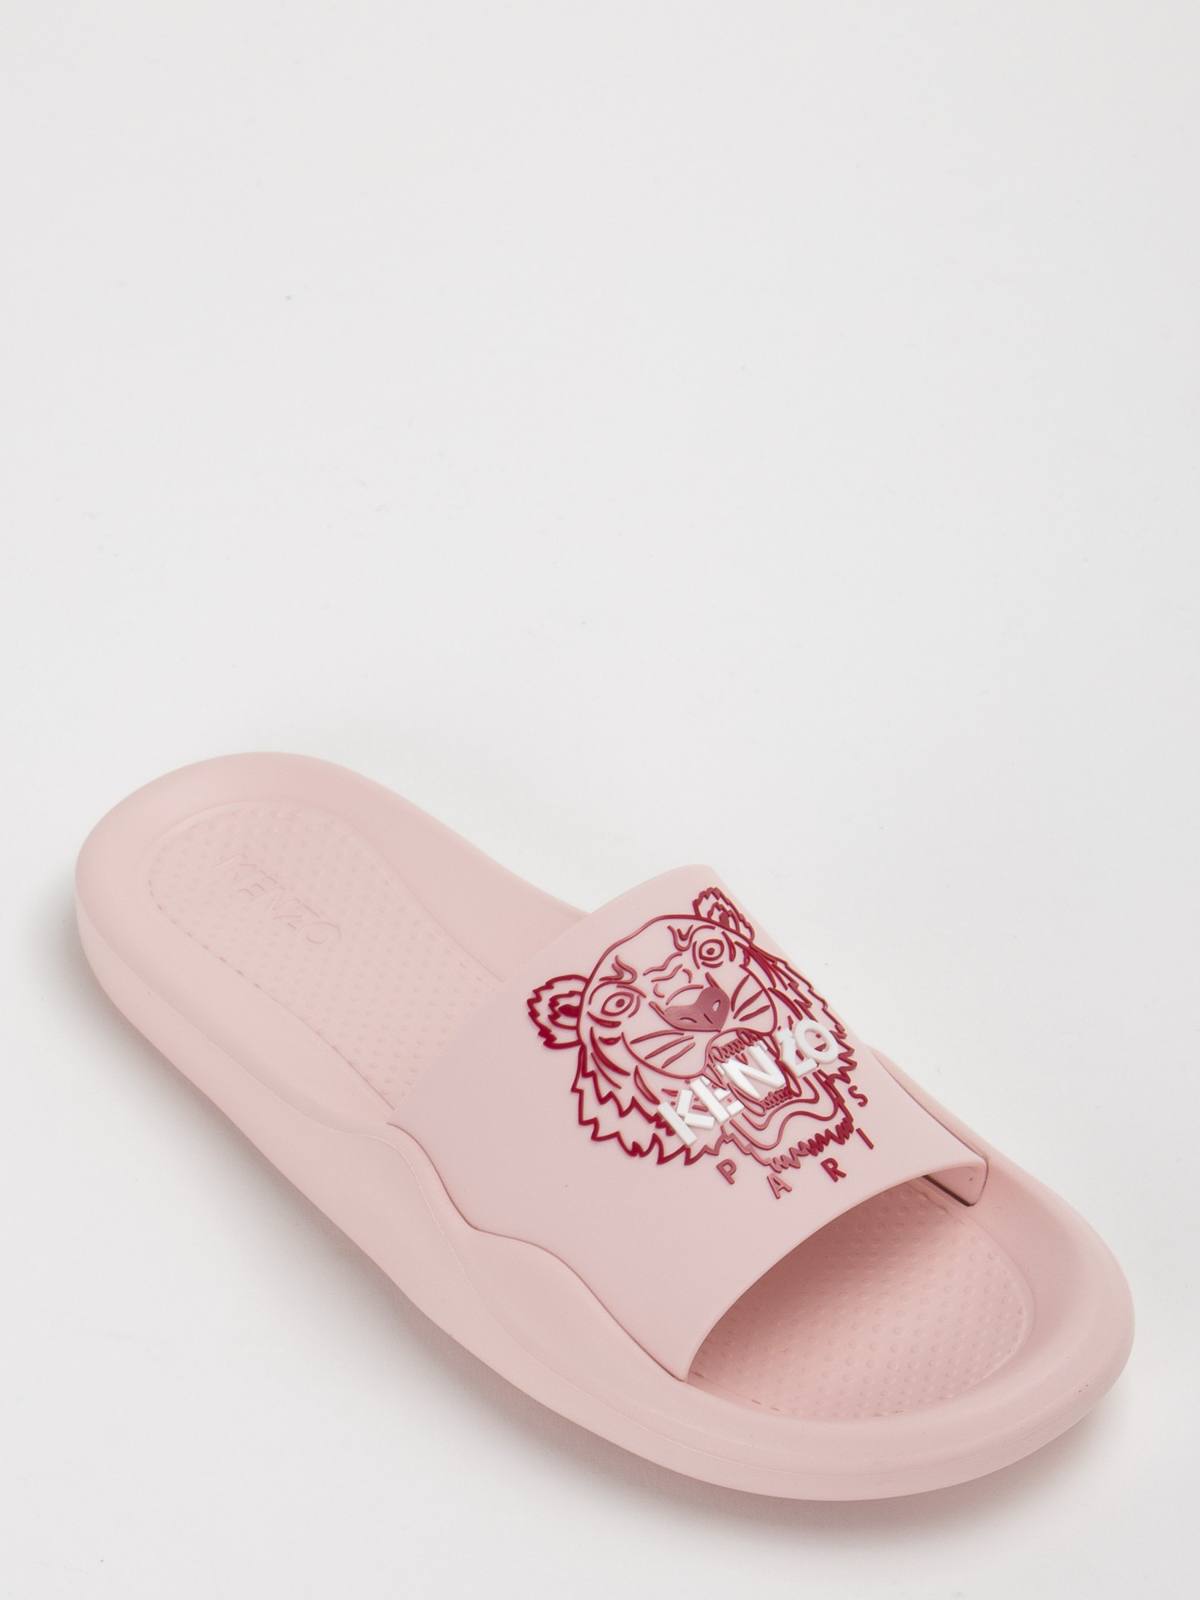 Flip flops Kenzo - Slippers - FC52MU104P6034A | Shop online at THEBS | Sneaker